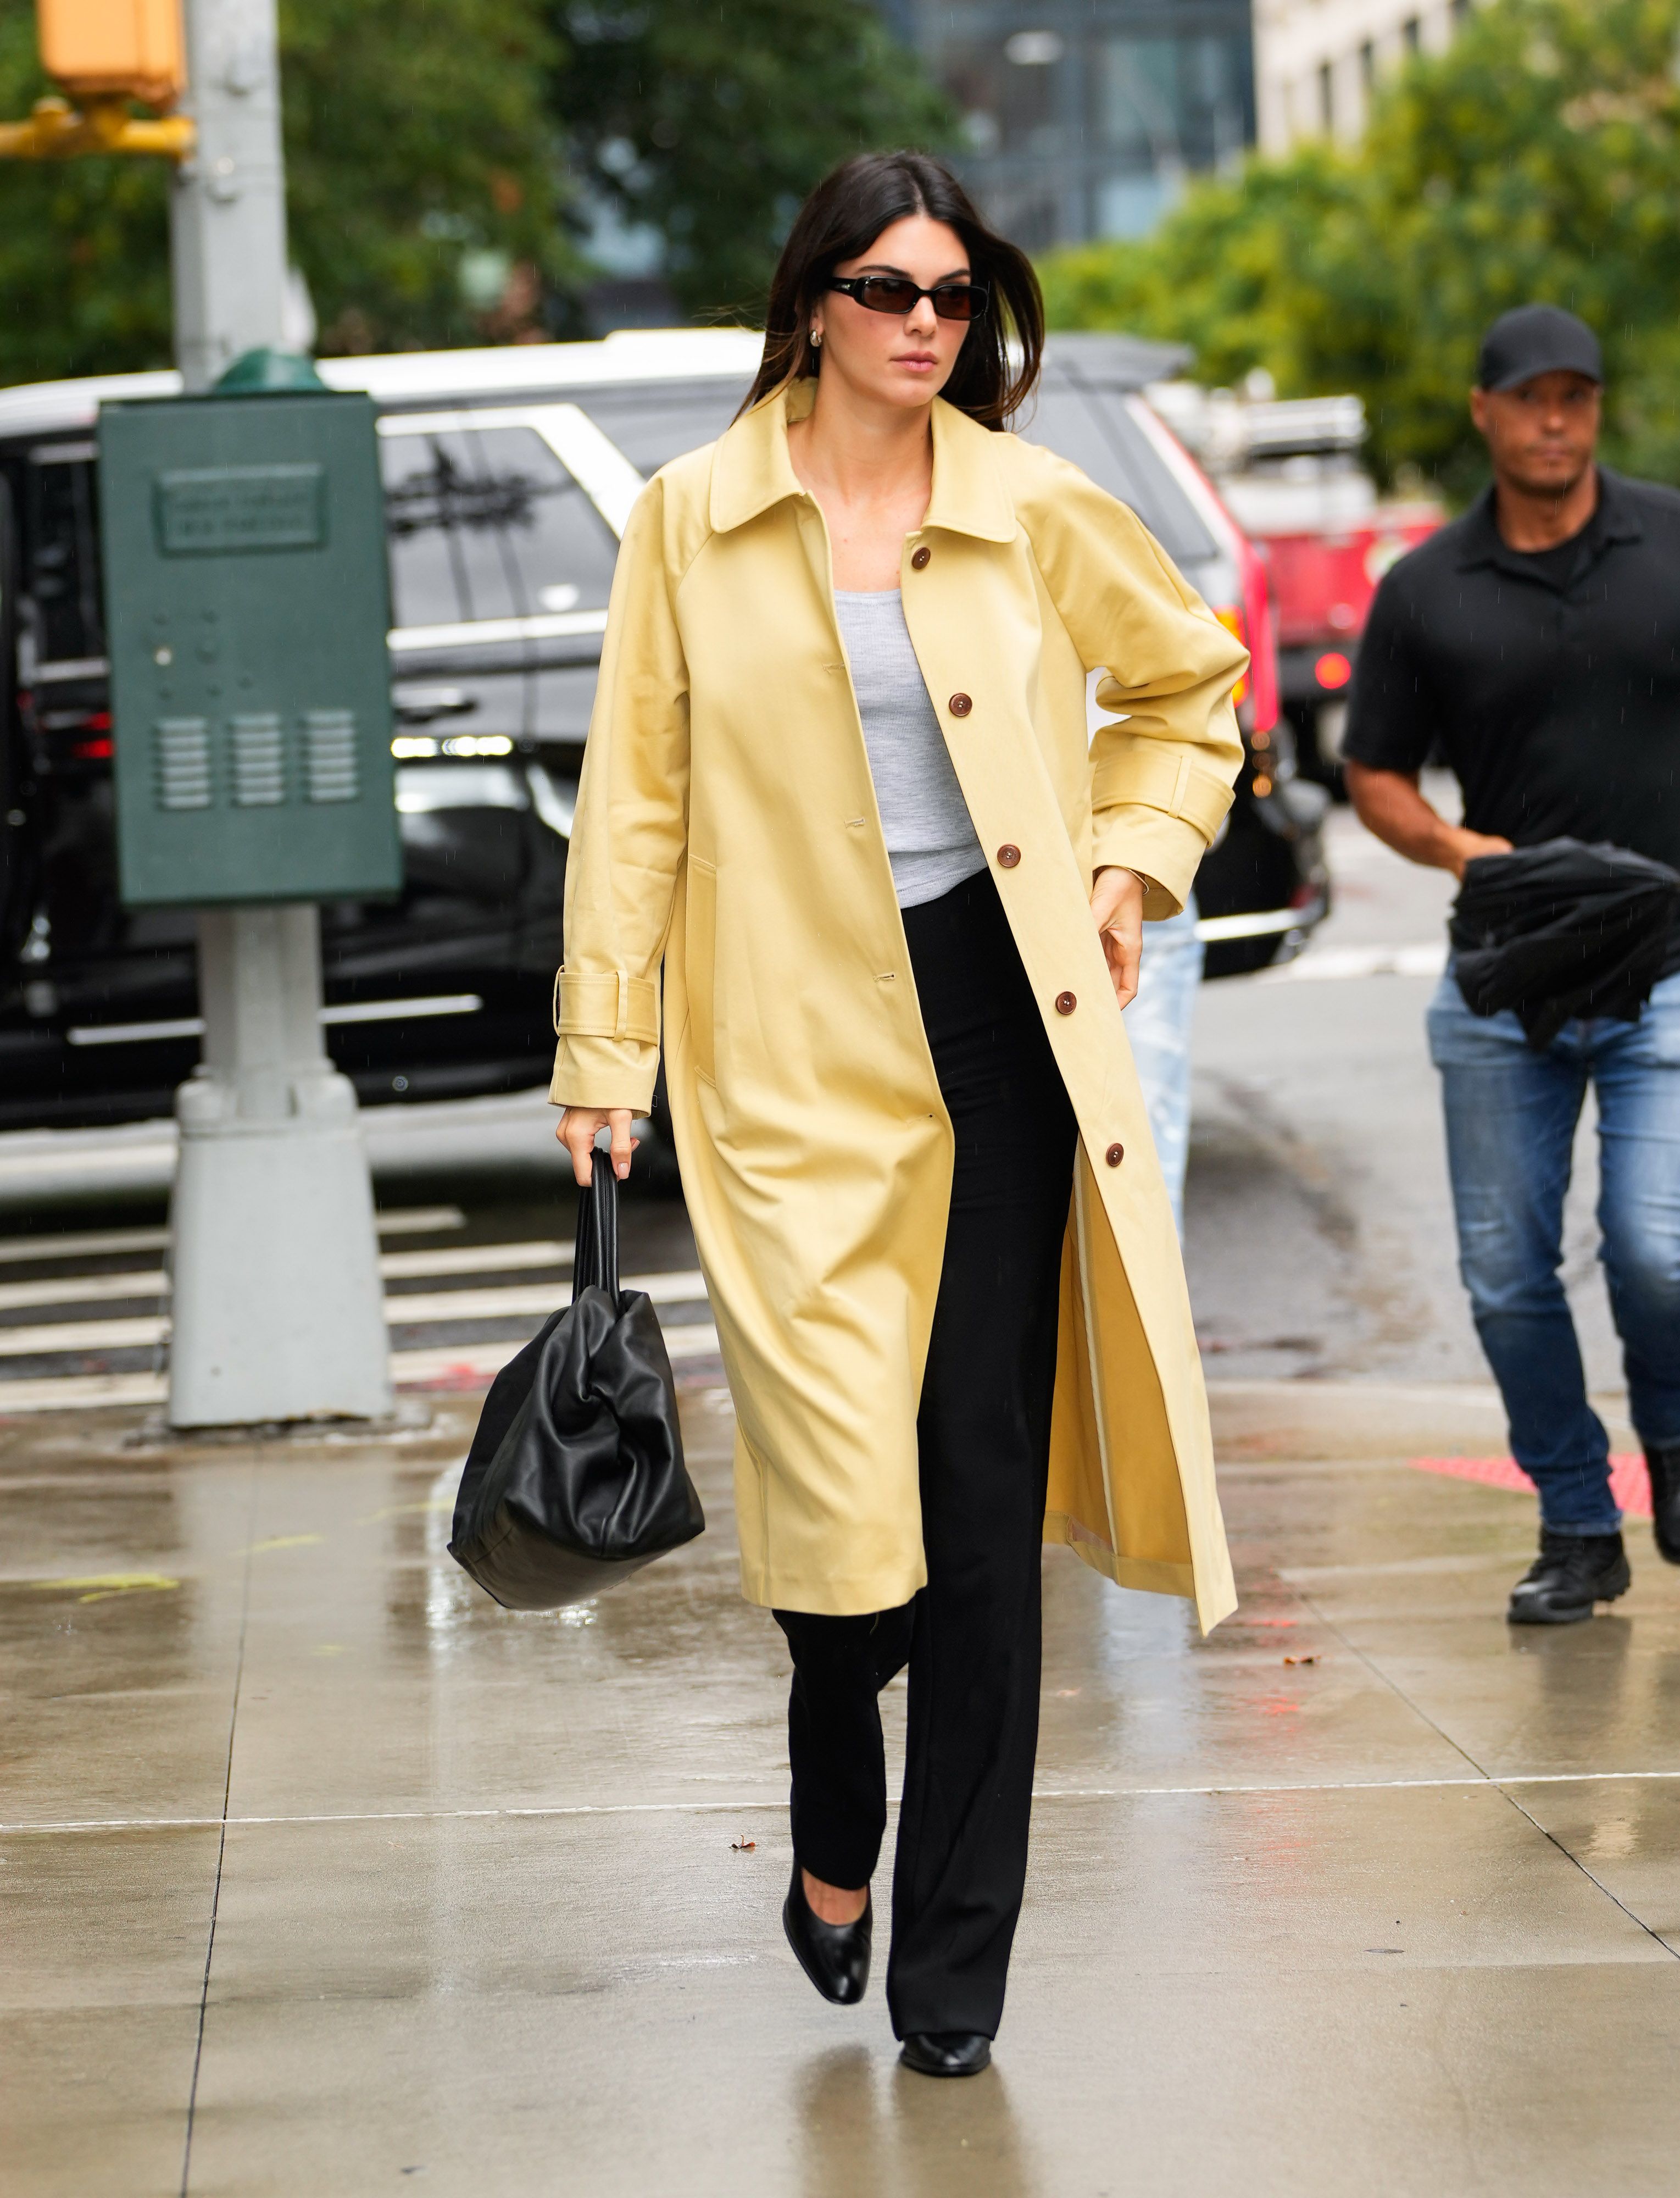 Kendall Jenner Arriving in Los Angeles April 4, 2021 – Star Style